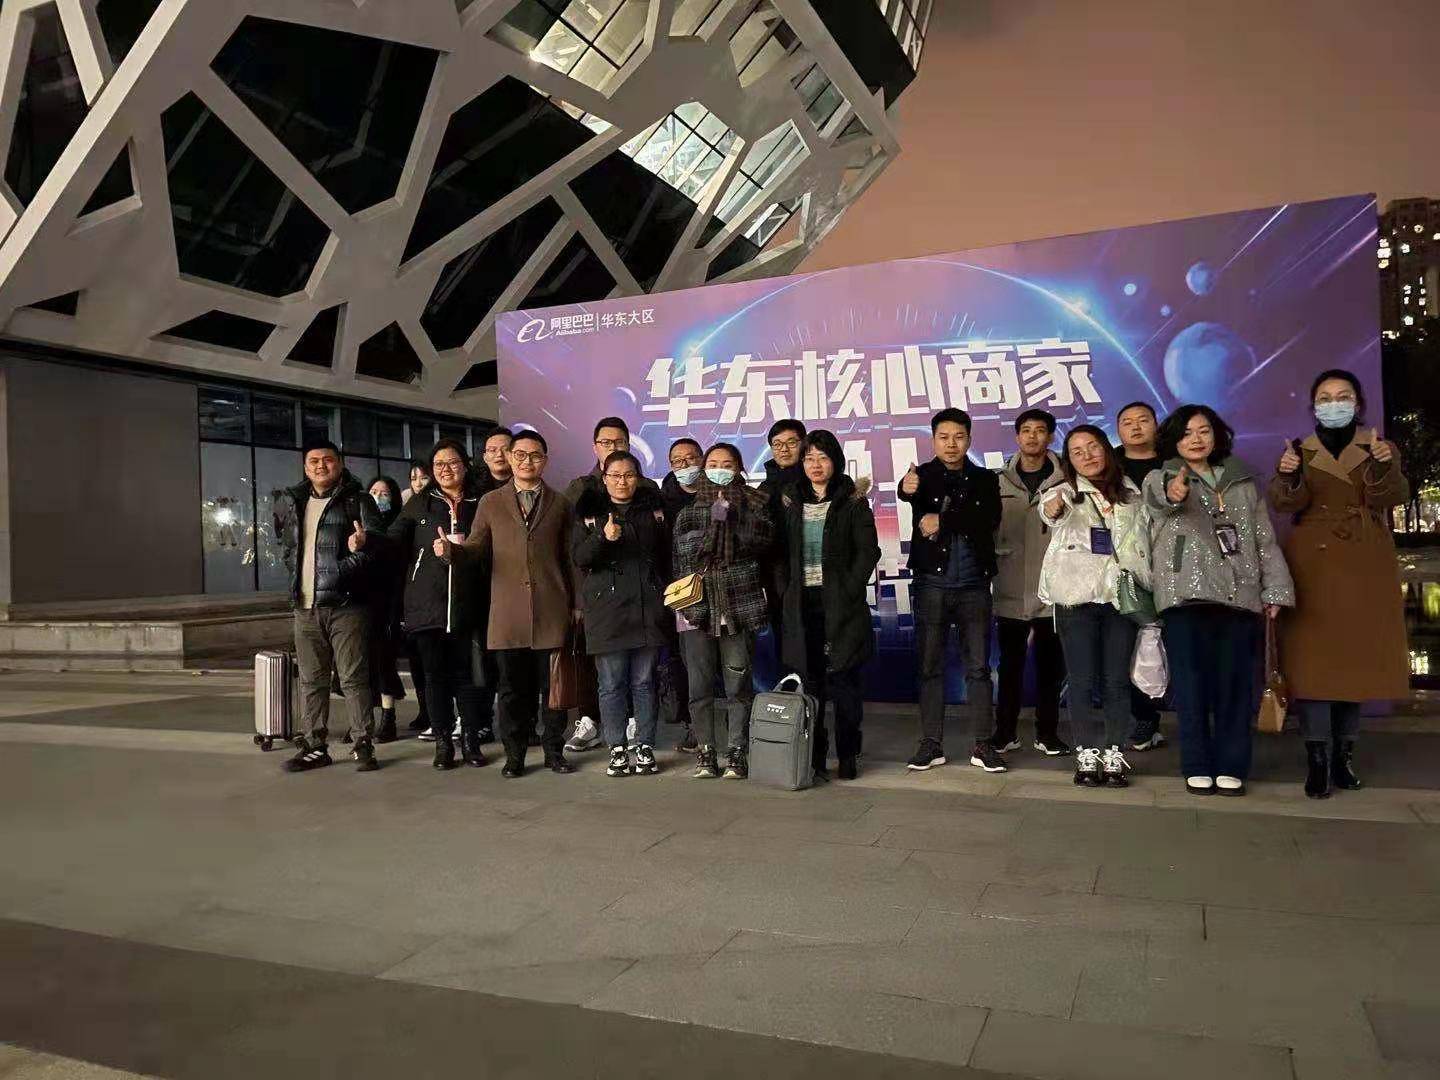 We participated in the Alibaba Core Merchant Training Camp last week